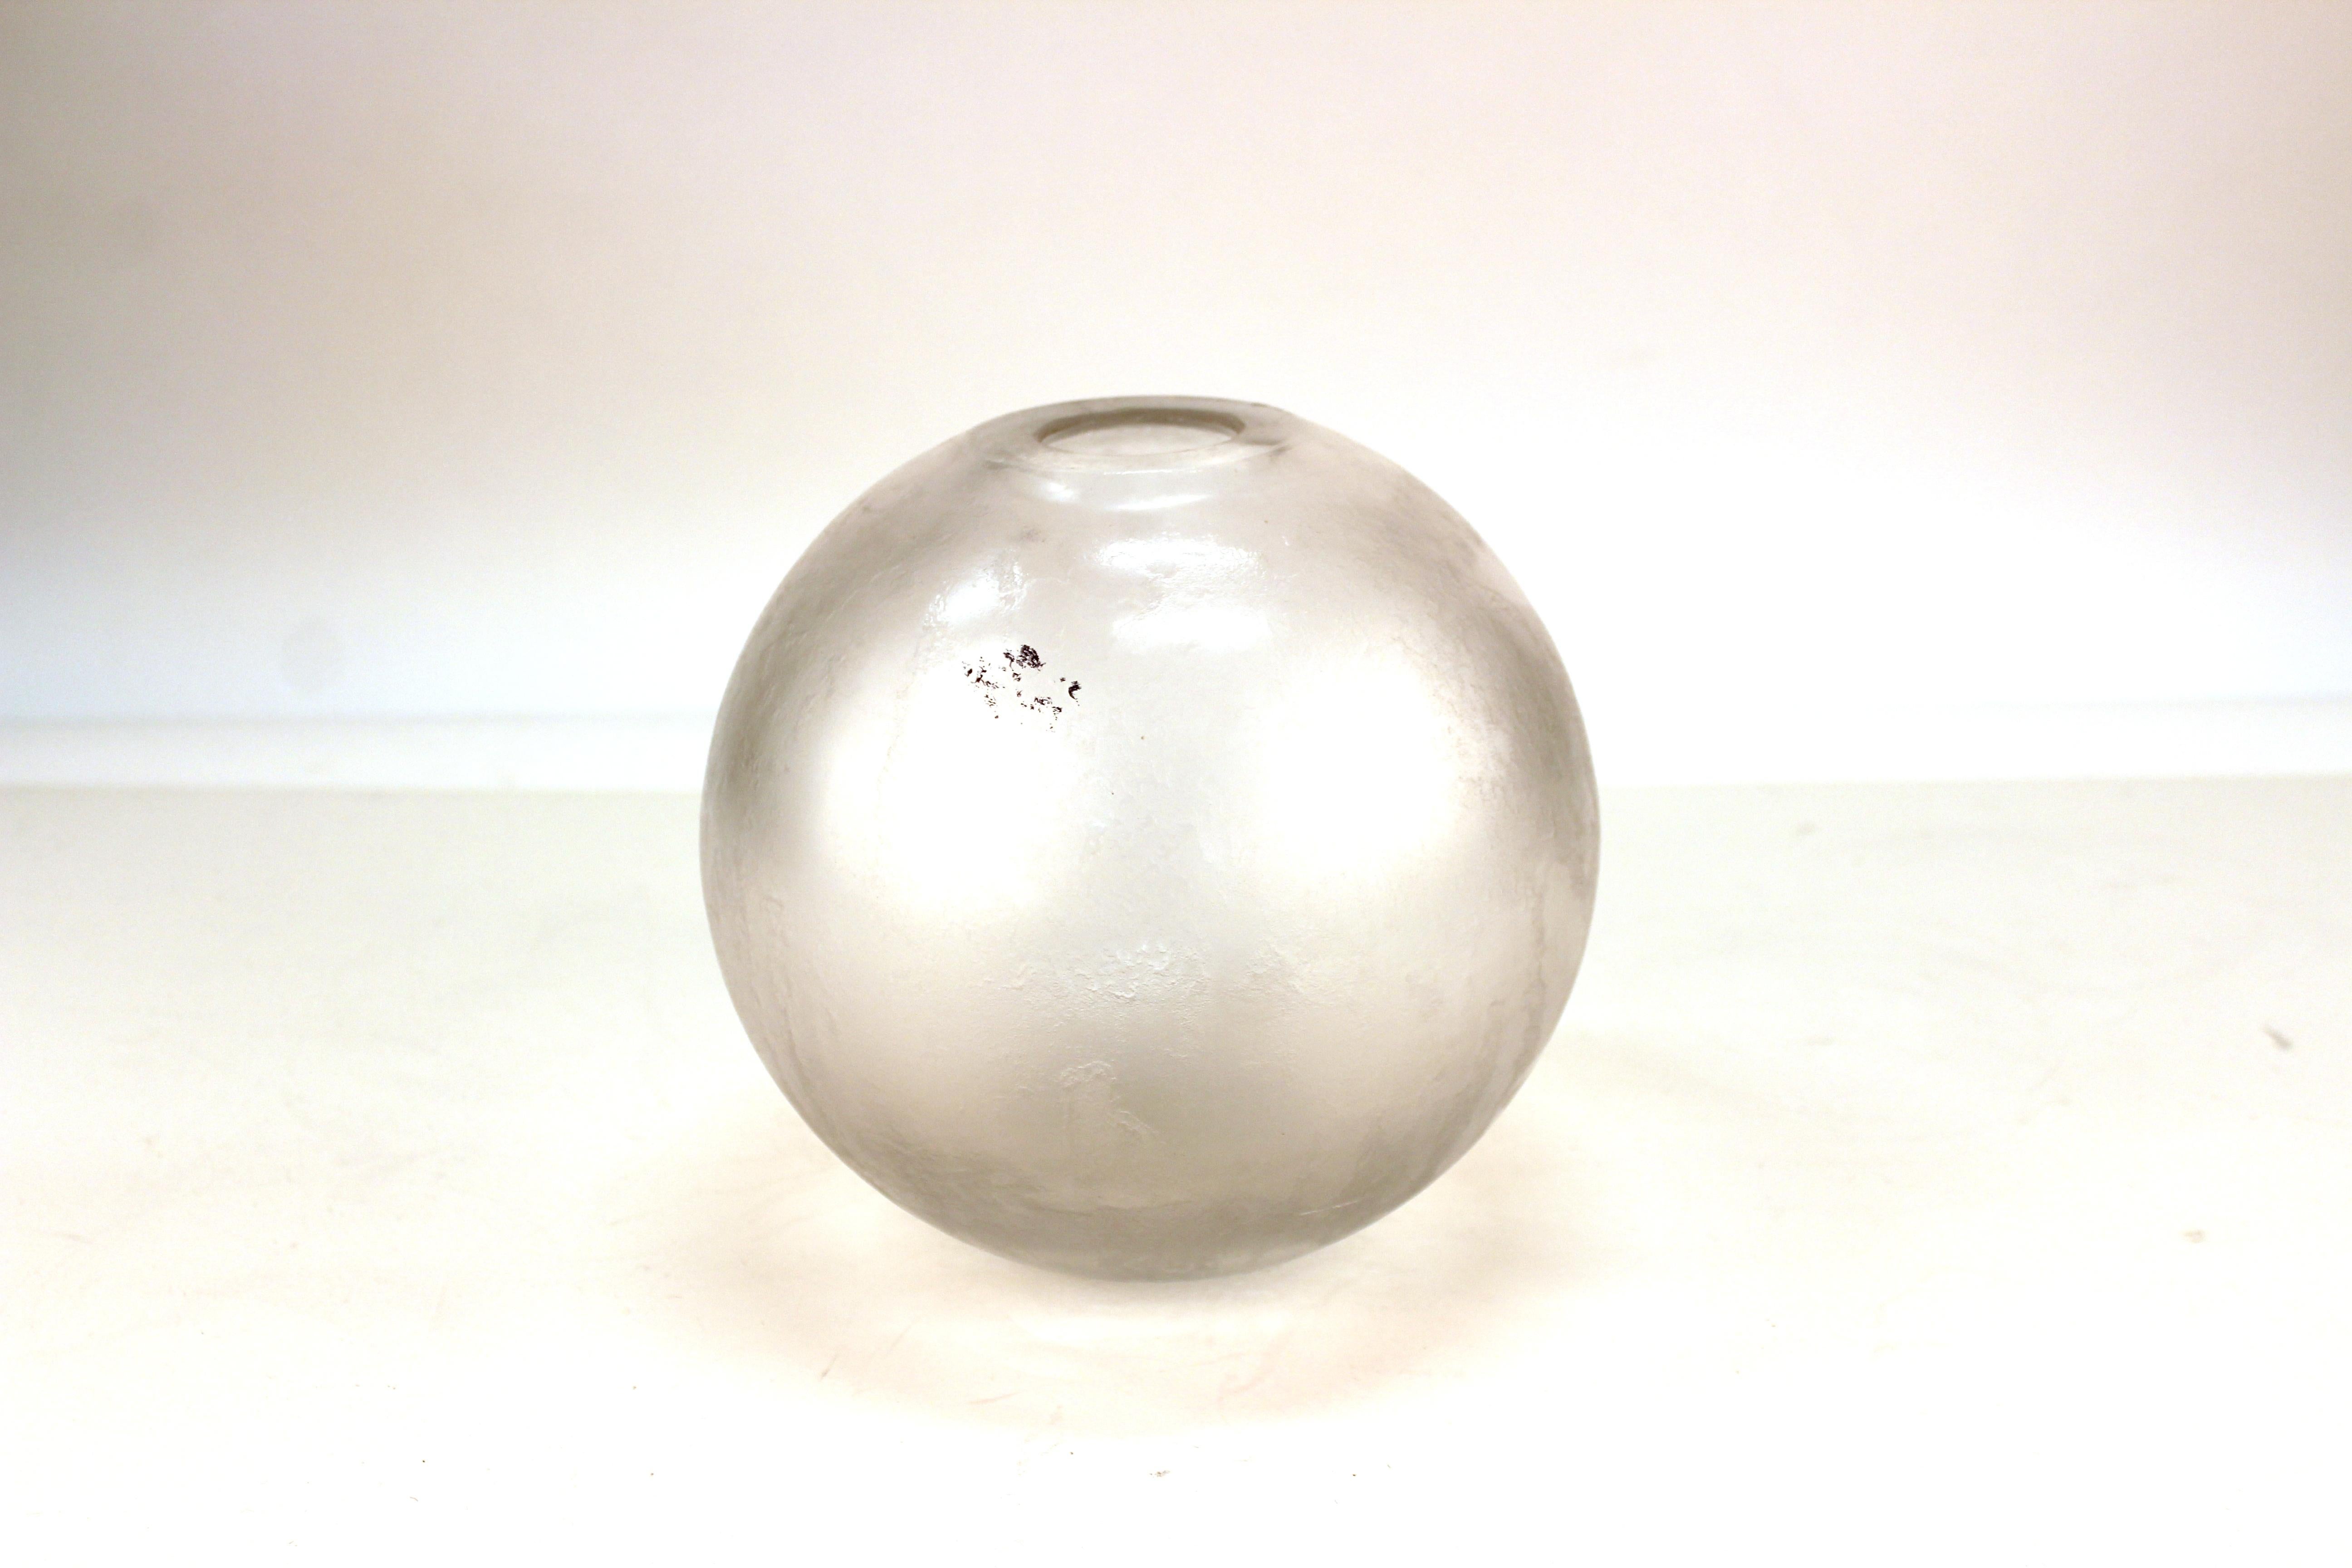 Orrefors Swedish Mid-Century Modern iridescent globular glass vase with textured surface. The piece has an etched makers mark on the bottom and is in great vintage condition.